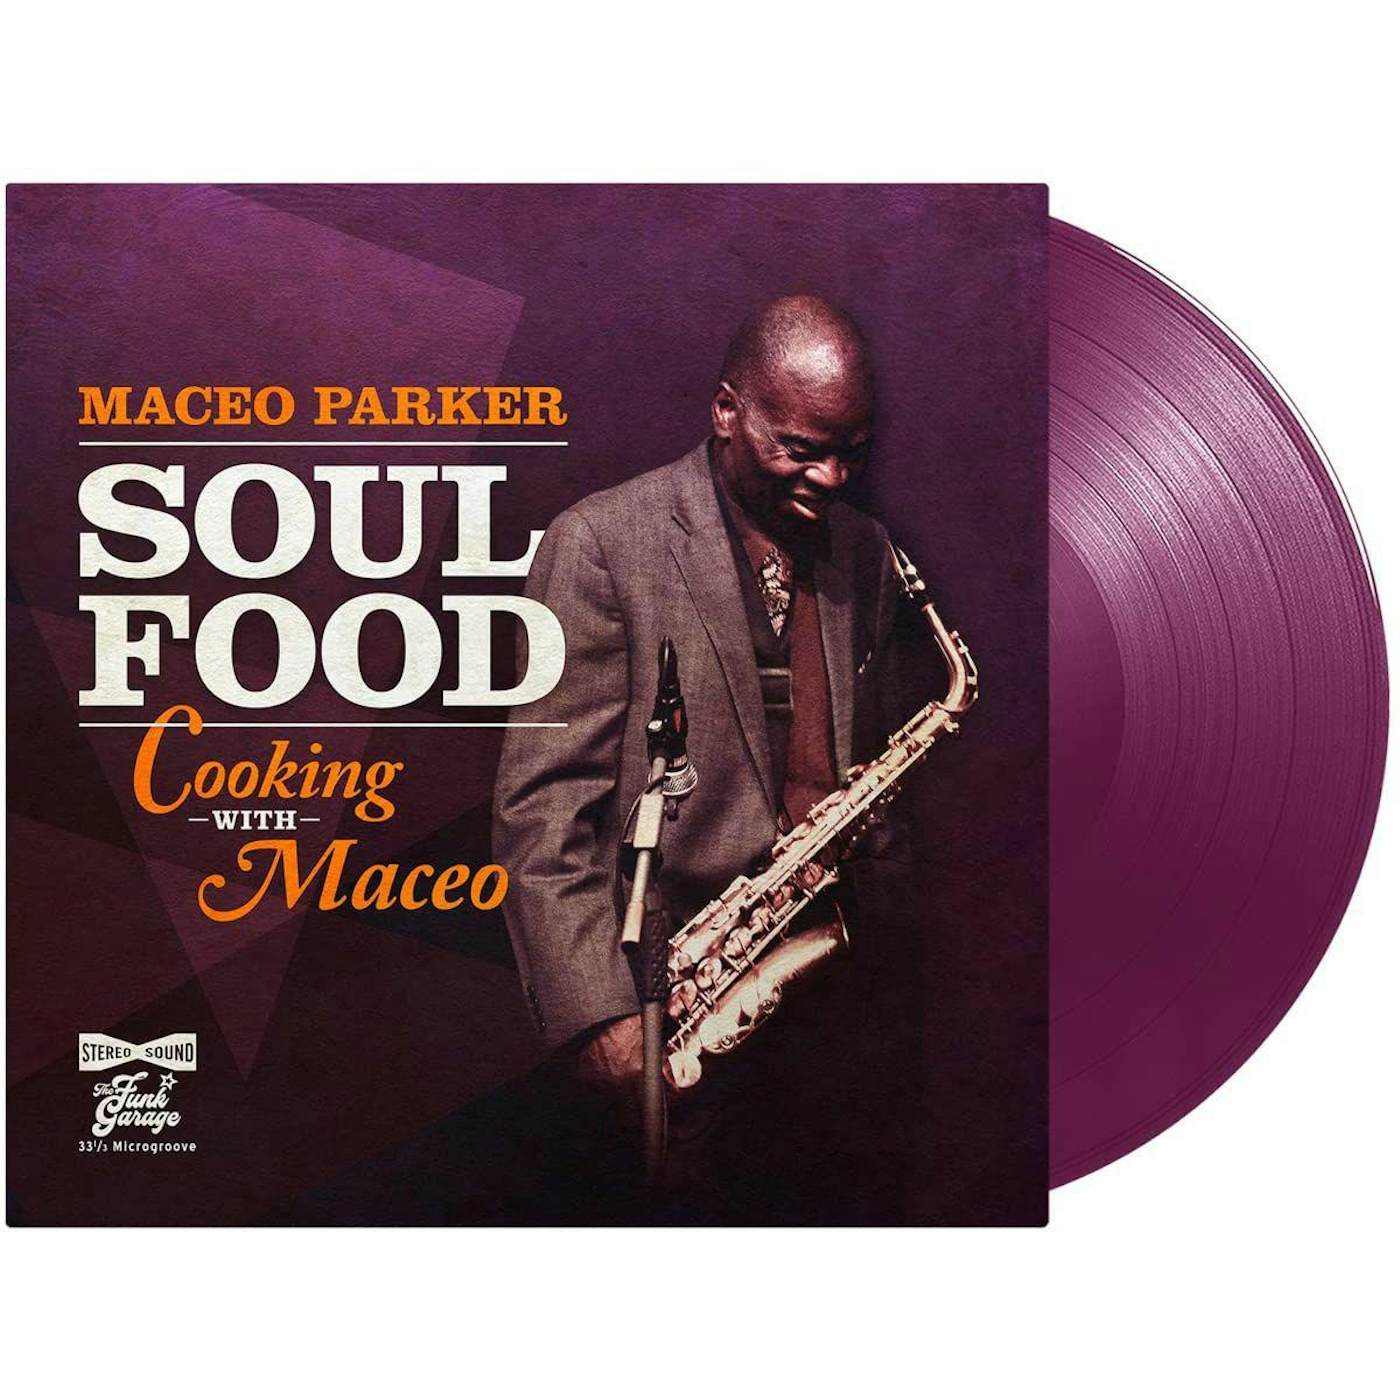 Maceo Parker Soul Food - Cooking With Maceo (140g/Purple) Vinyl Record